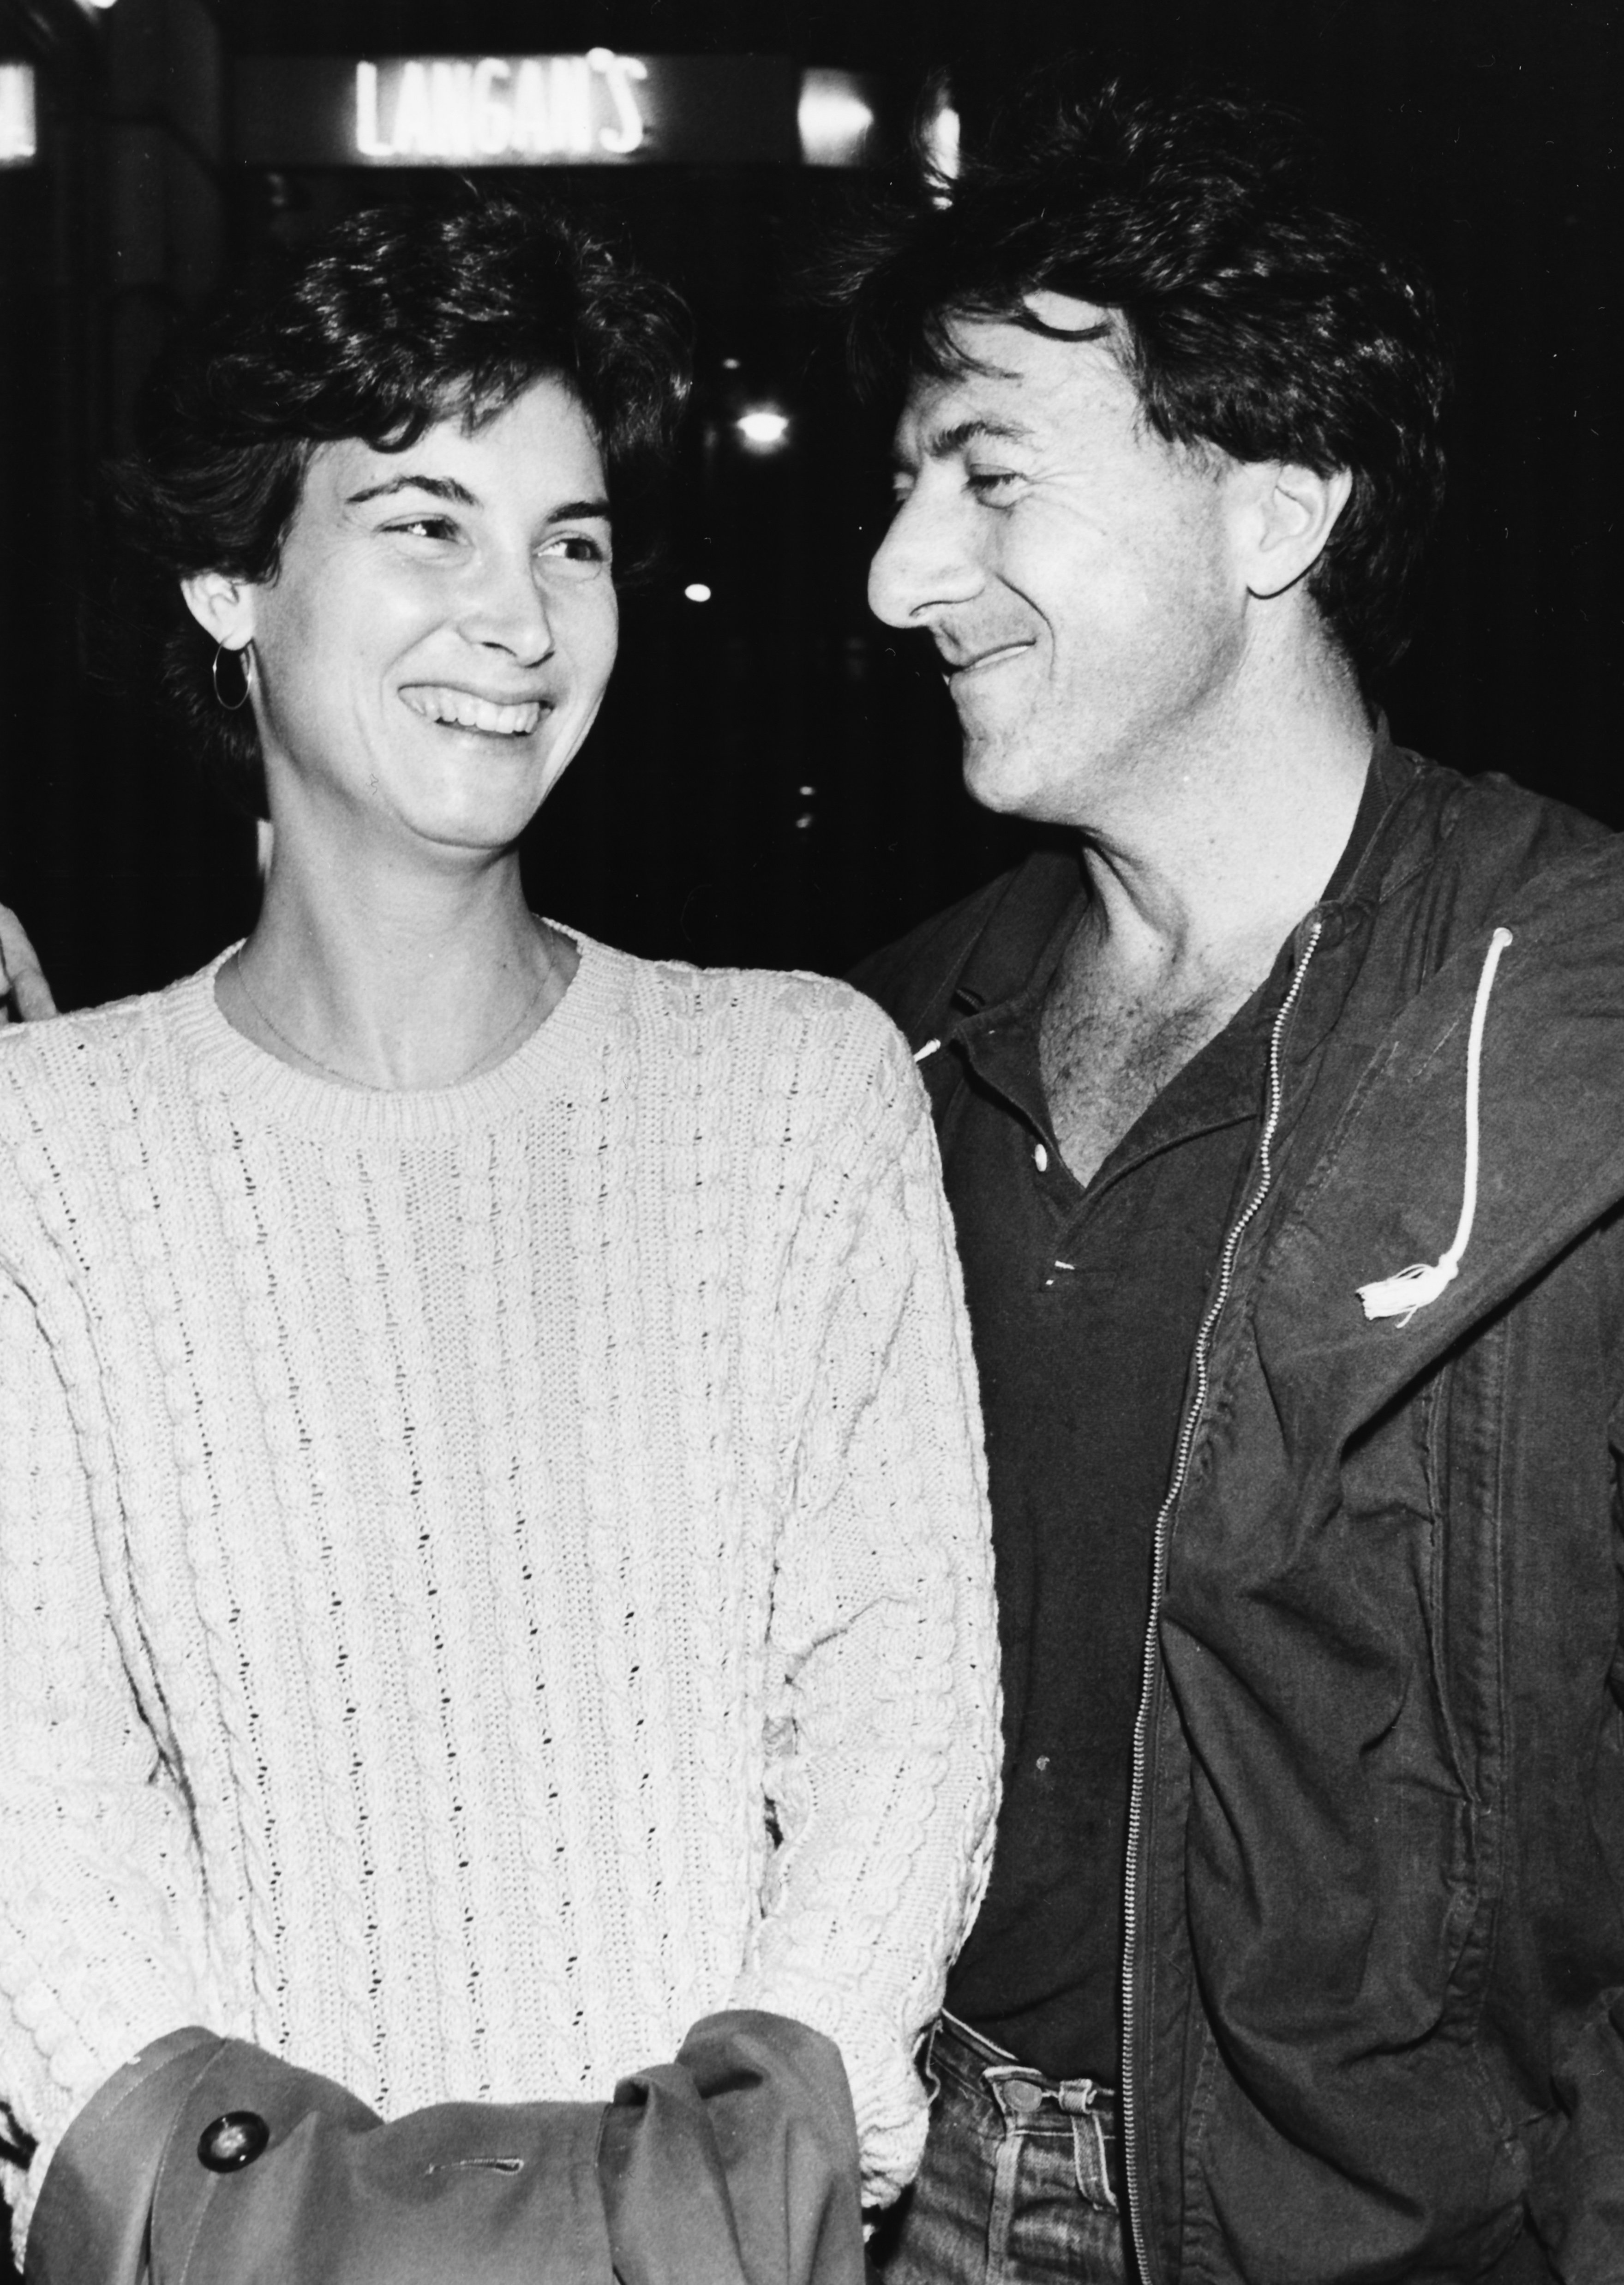 Actor Dustin Hoffman and his wife Lisa laughing together as they leave Langan's Brasserie in London, October 20th 1983. | Source: Getty Images